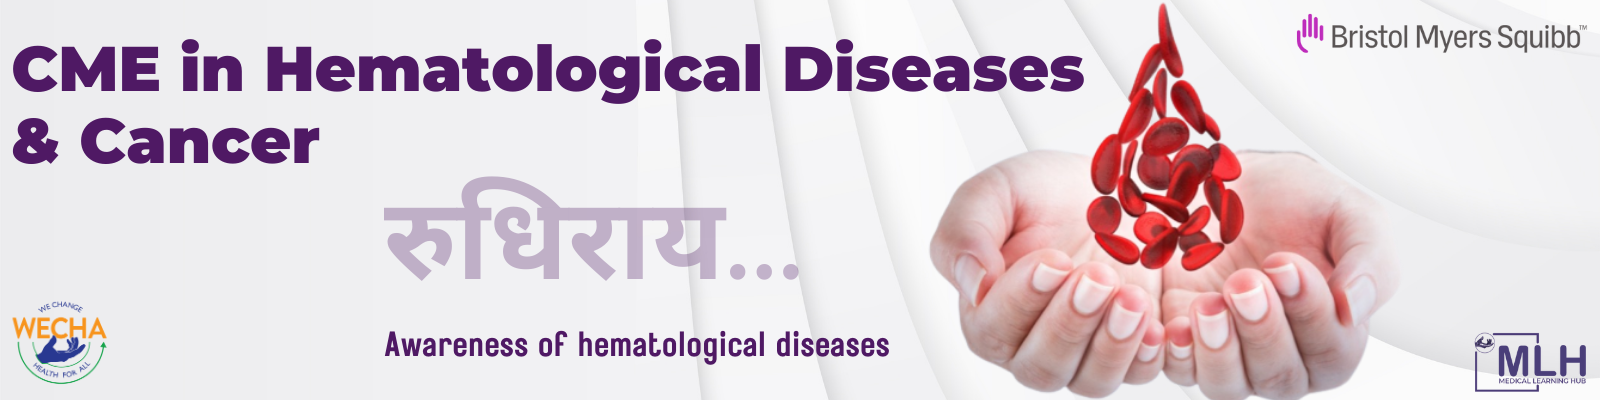 CME in Hematological Diseases & Cancer